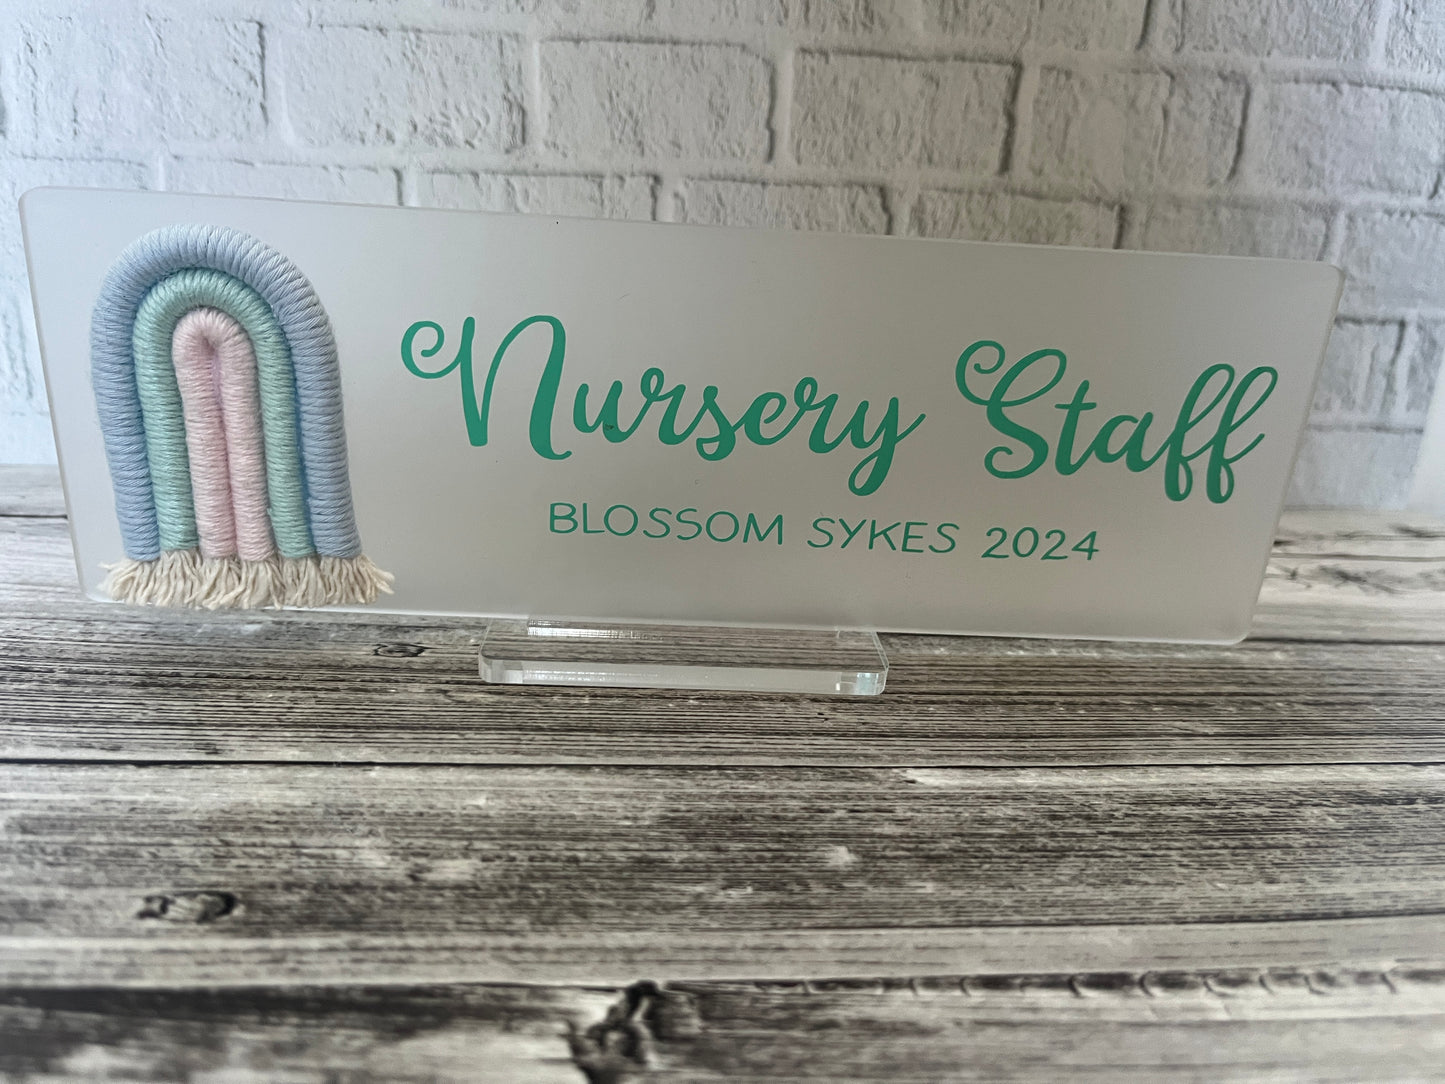 Frosted table top sign with rainbow and stand